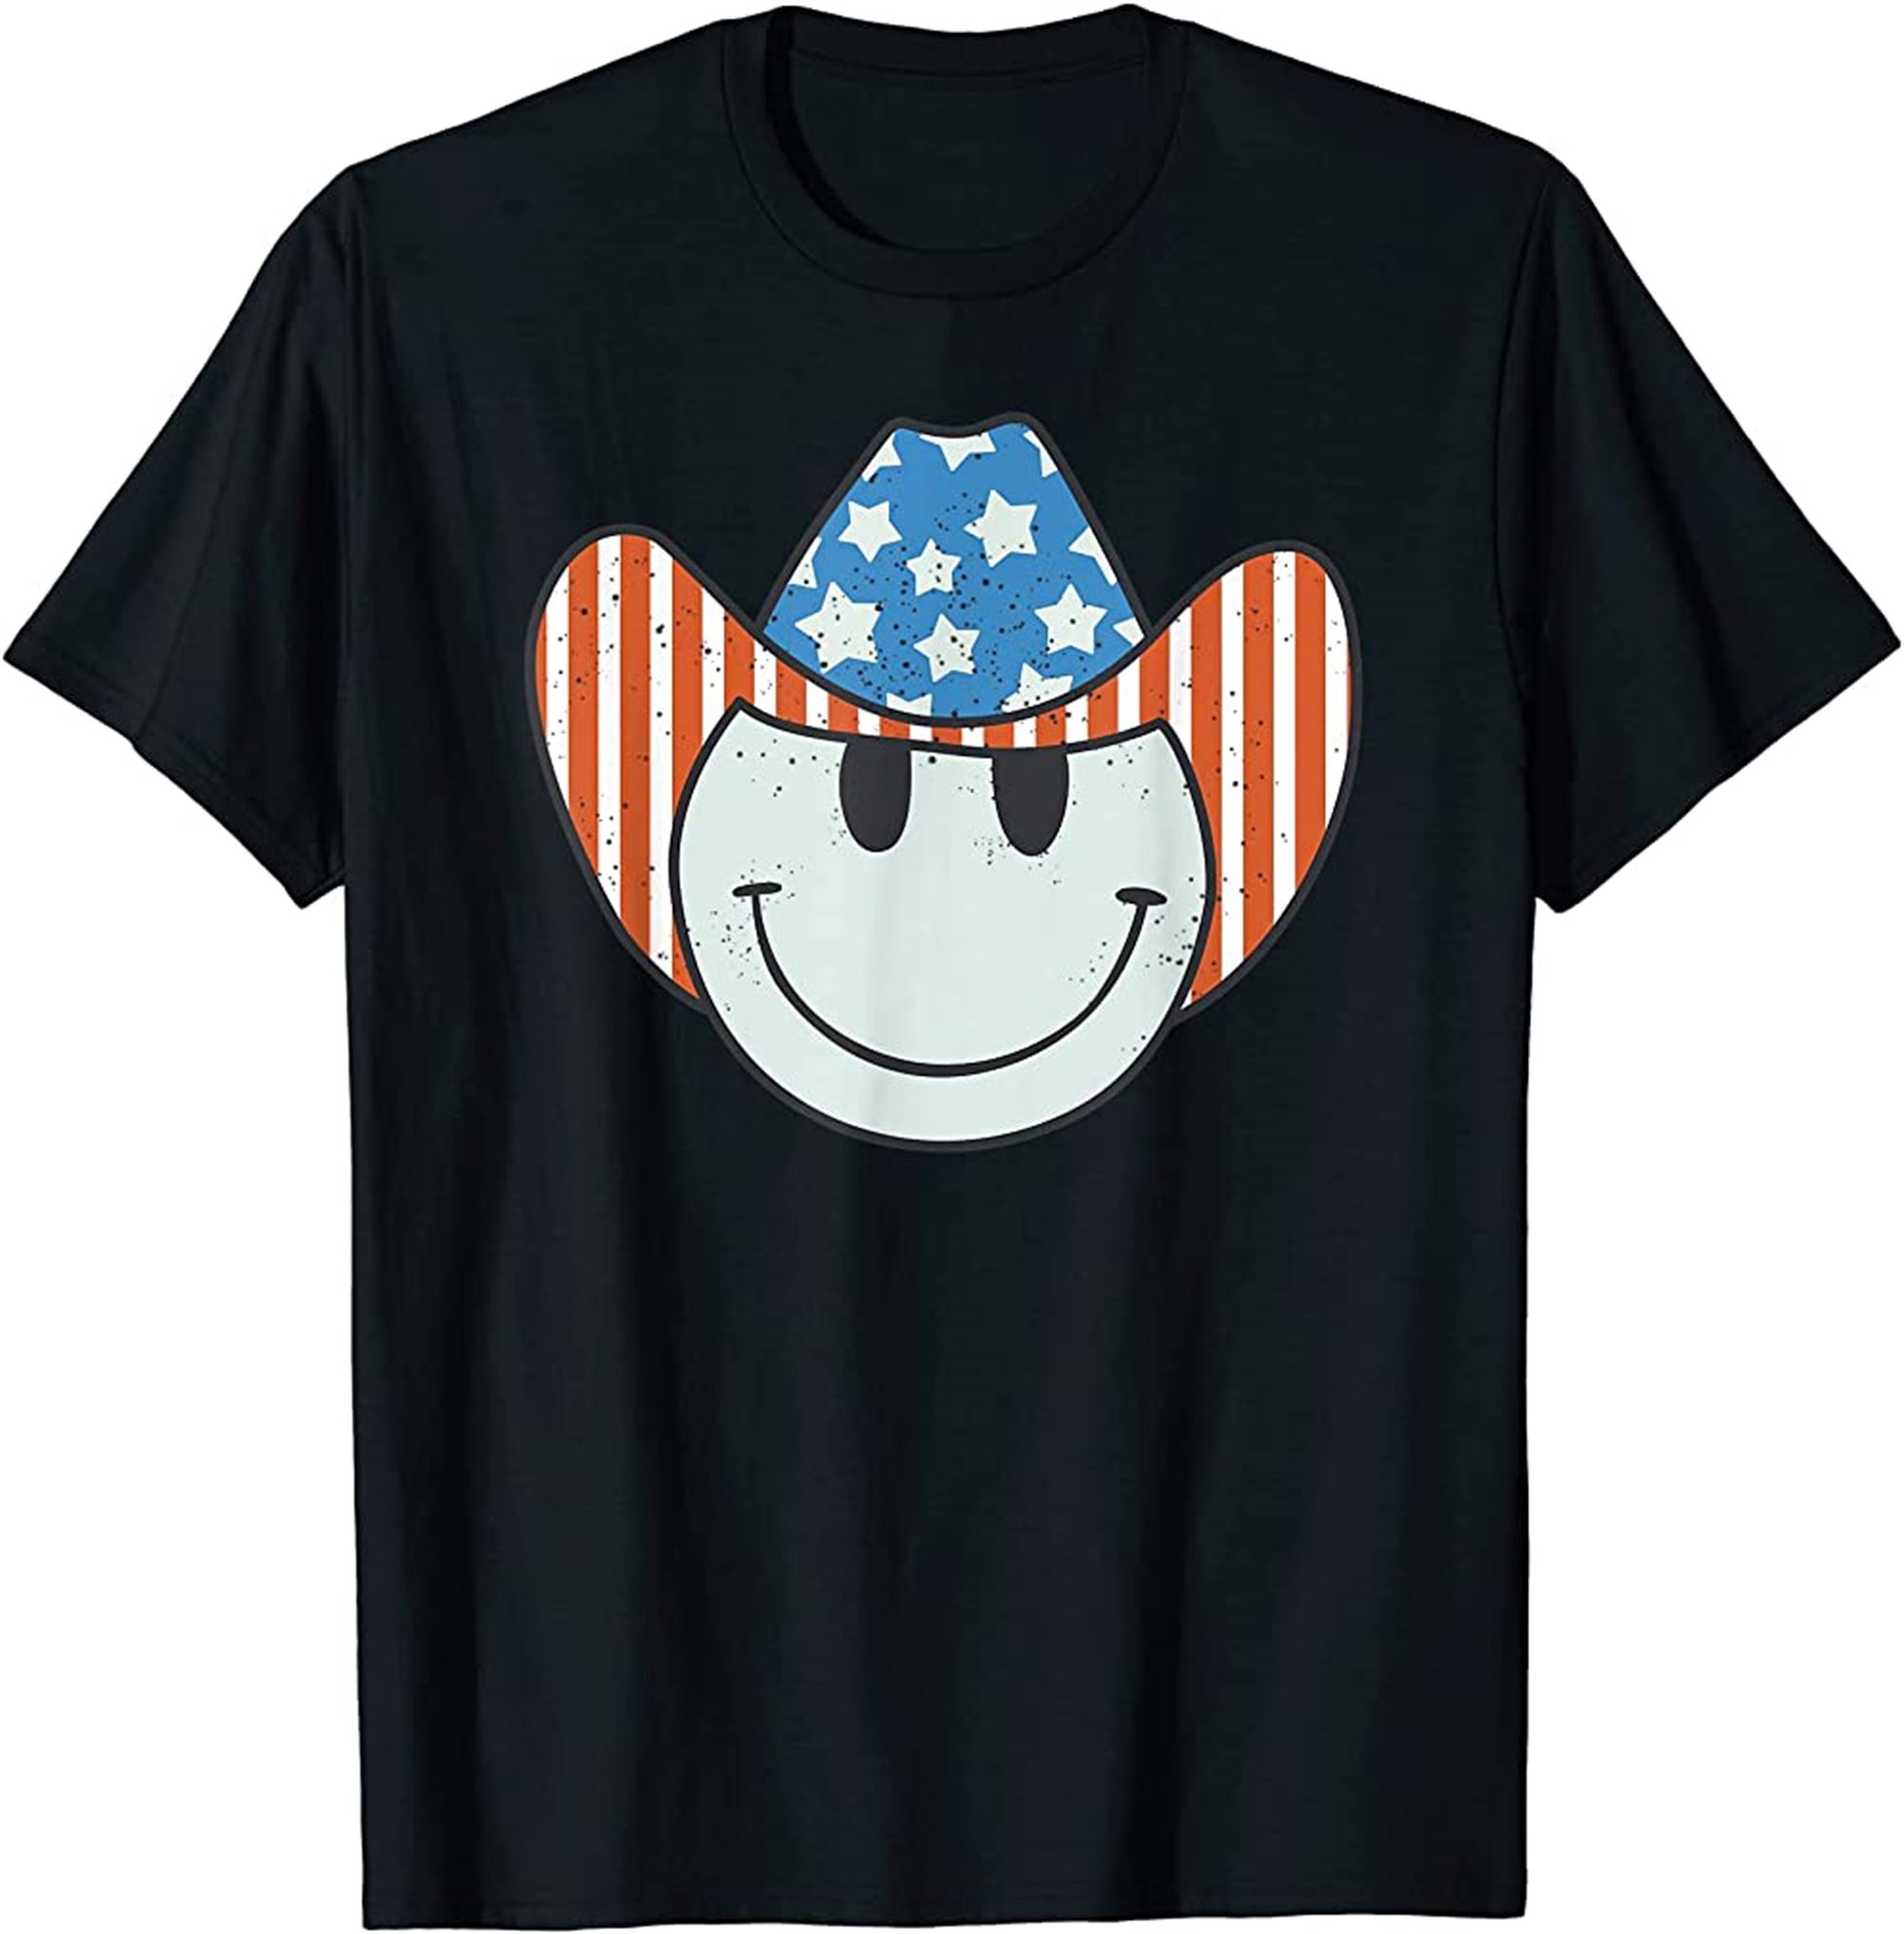 Retro Smiley Face American Flag Hat Patriotic 4th Of July T-shirt Size Up To 5xl